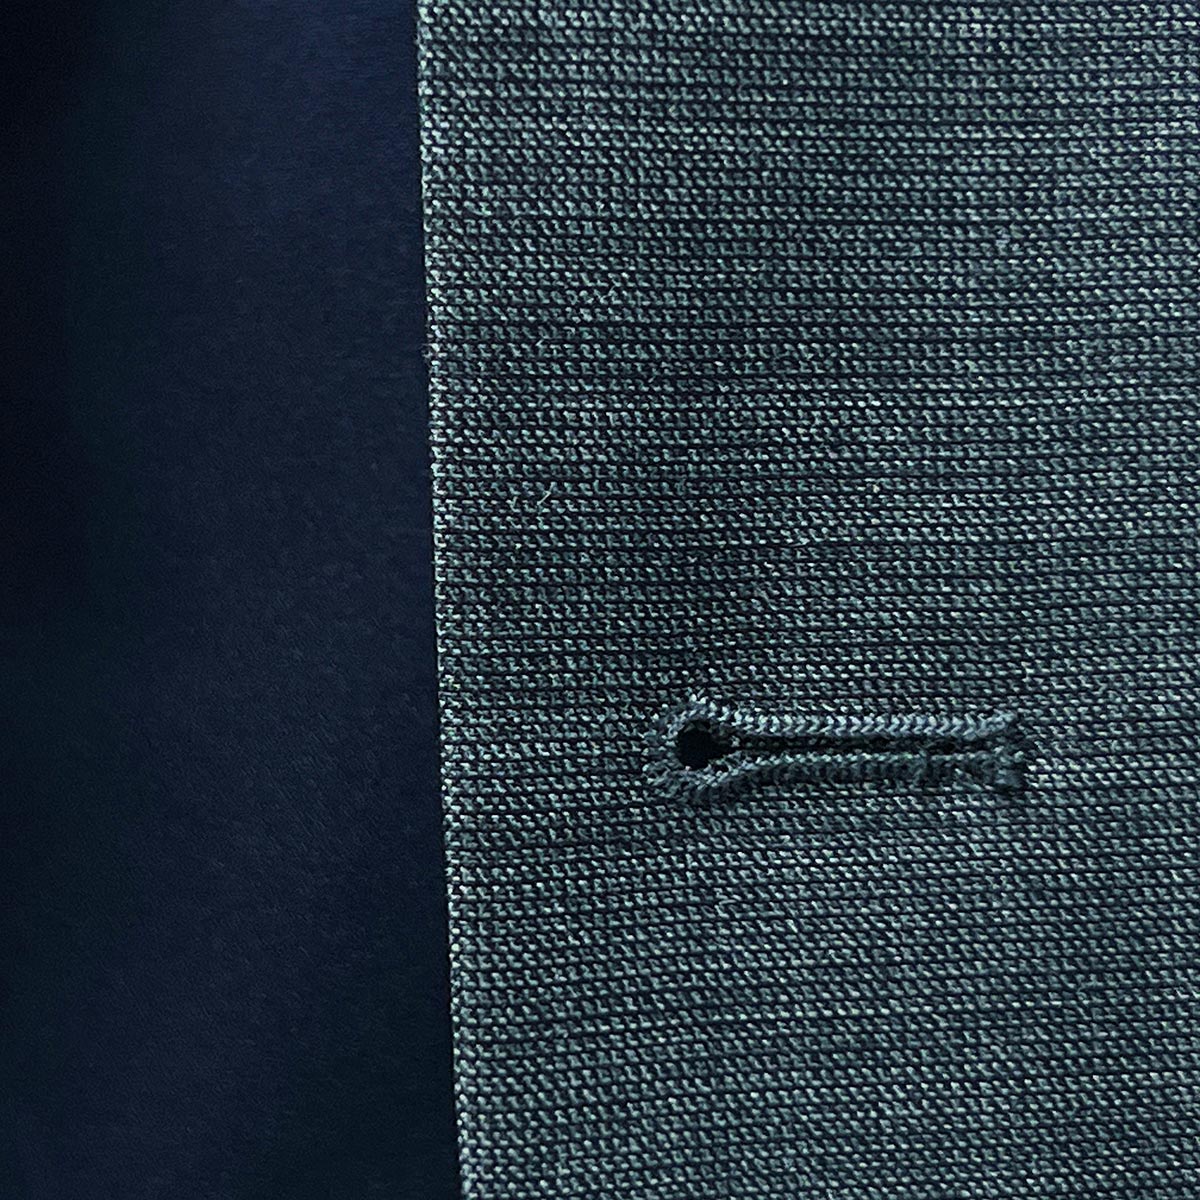 buttonholes adding a stylish flair to a dark grey nailhead suit.